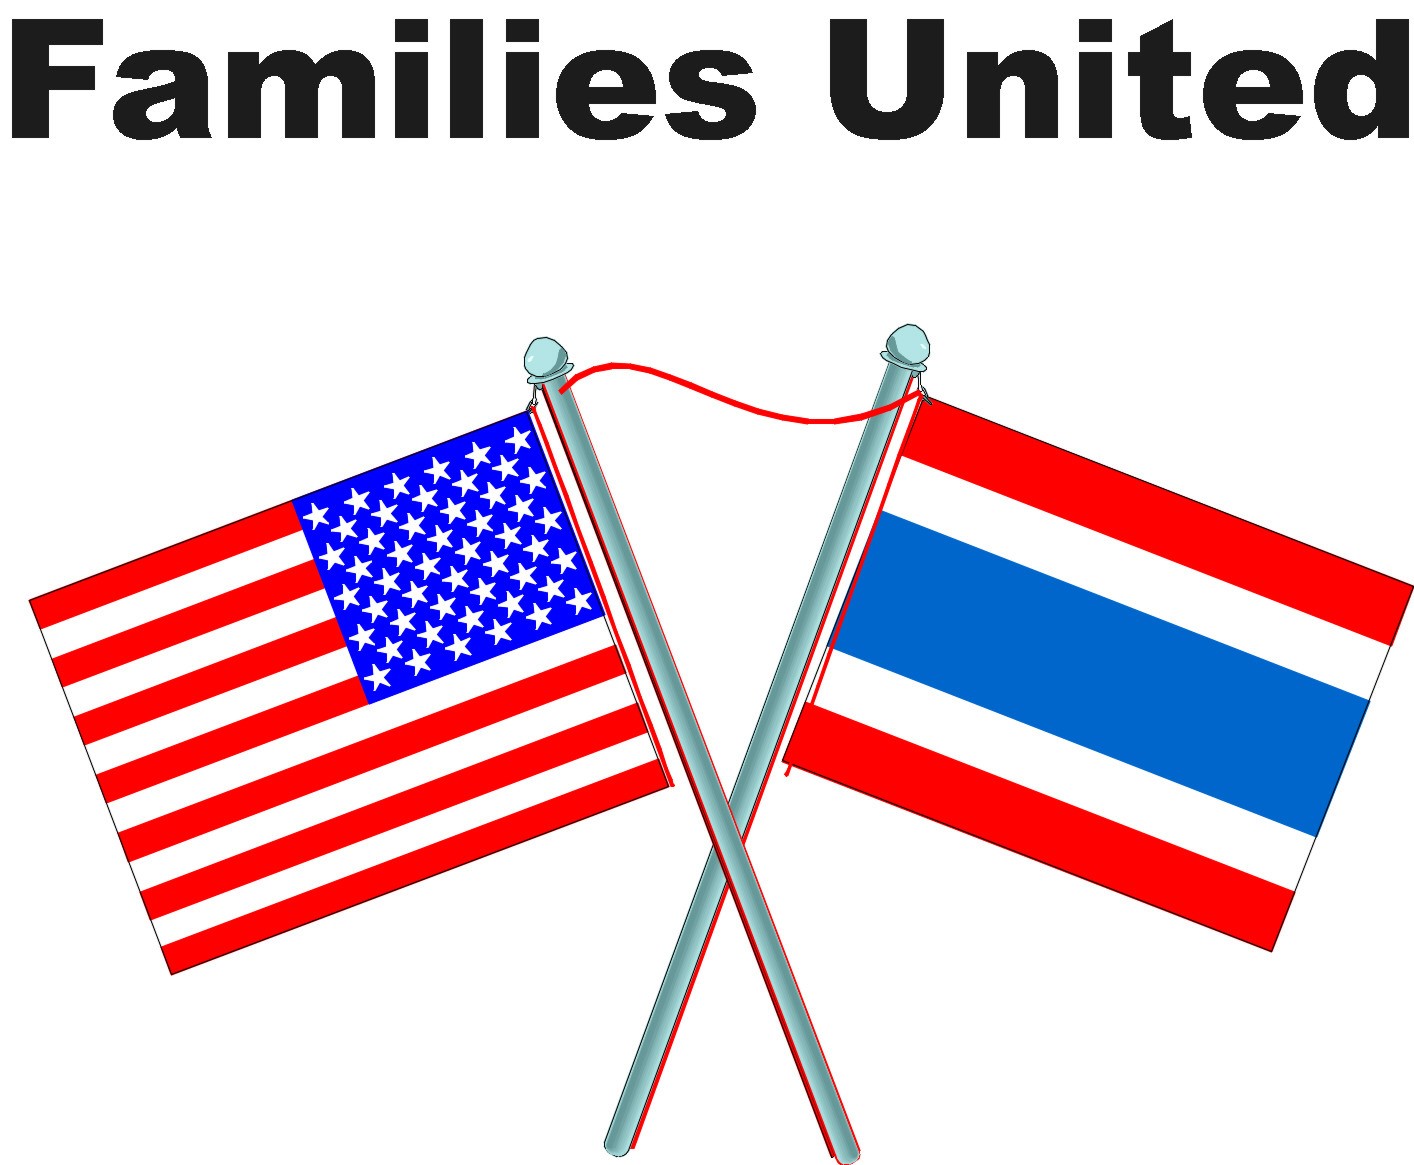 Familes United (Thailand and USA) t-shirt